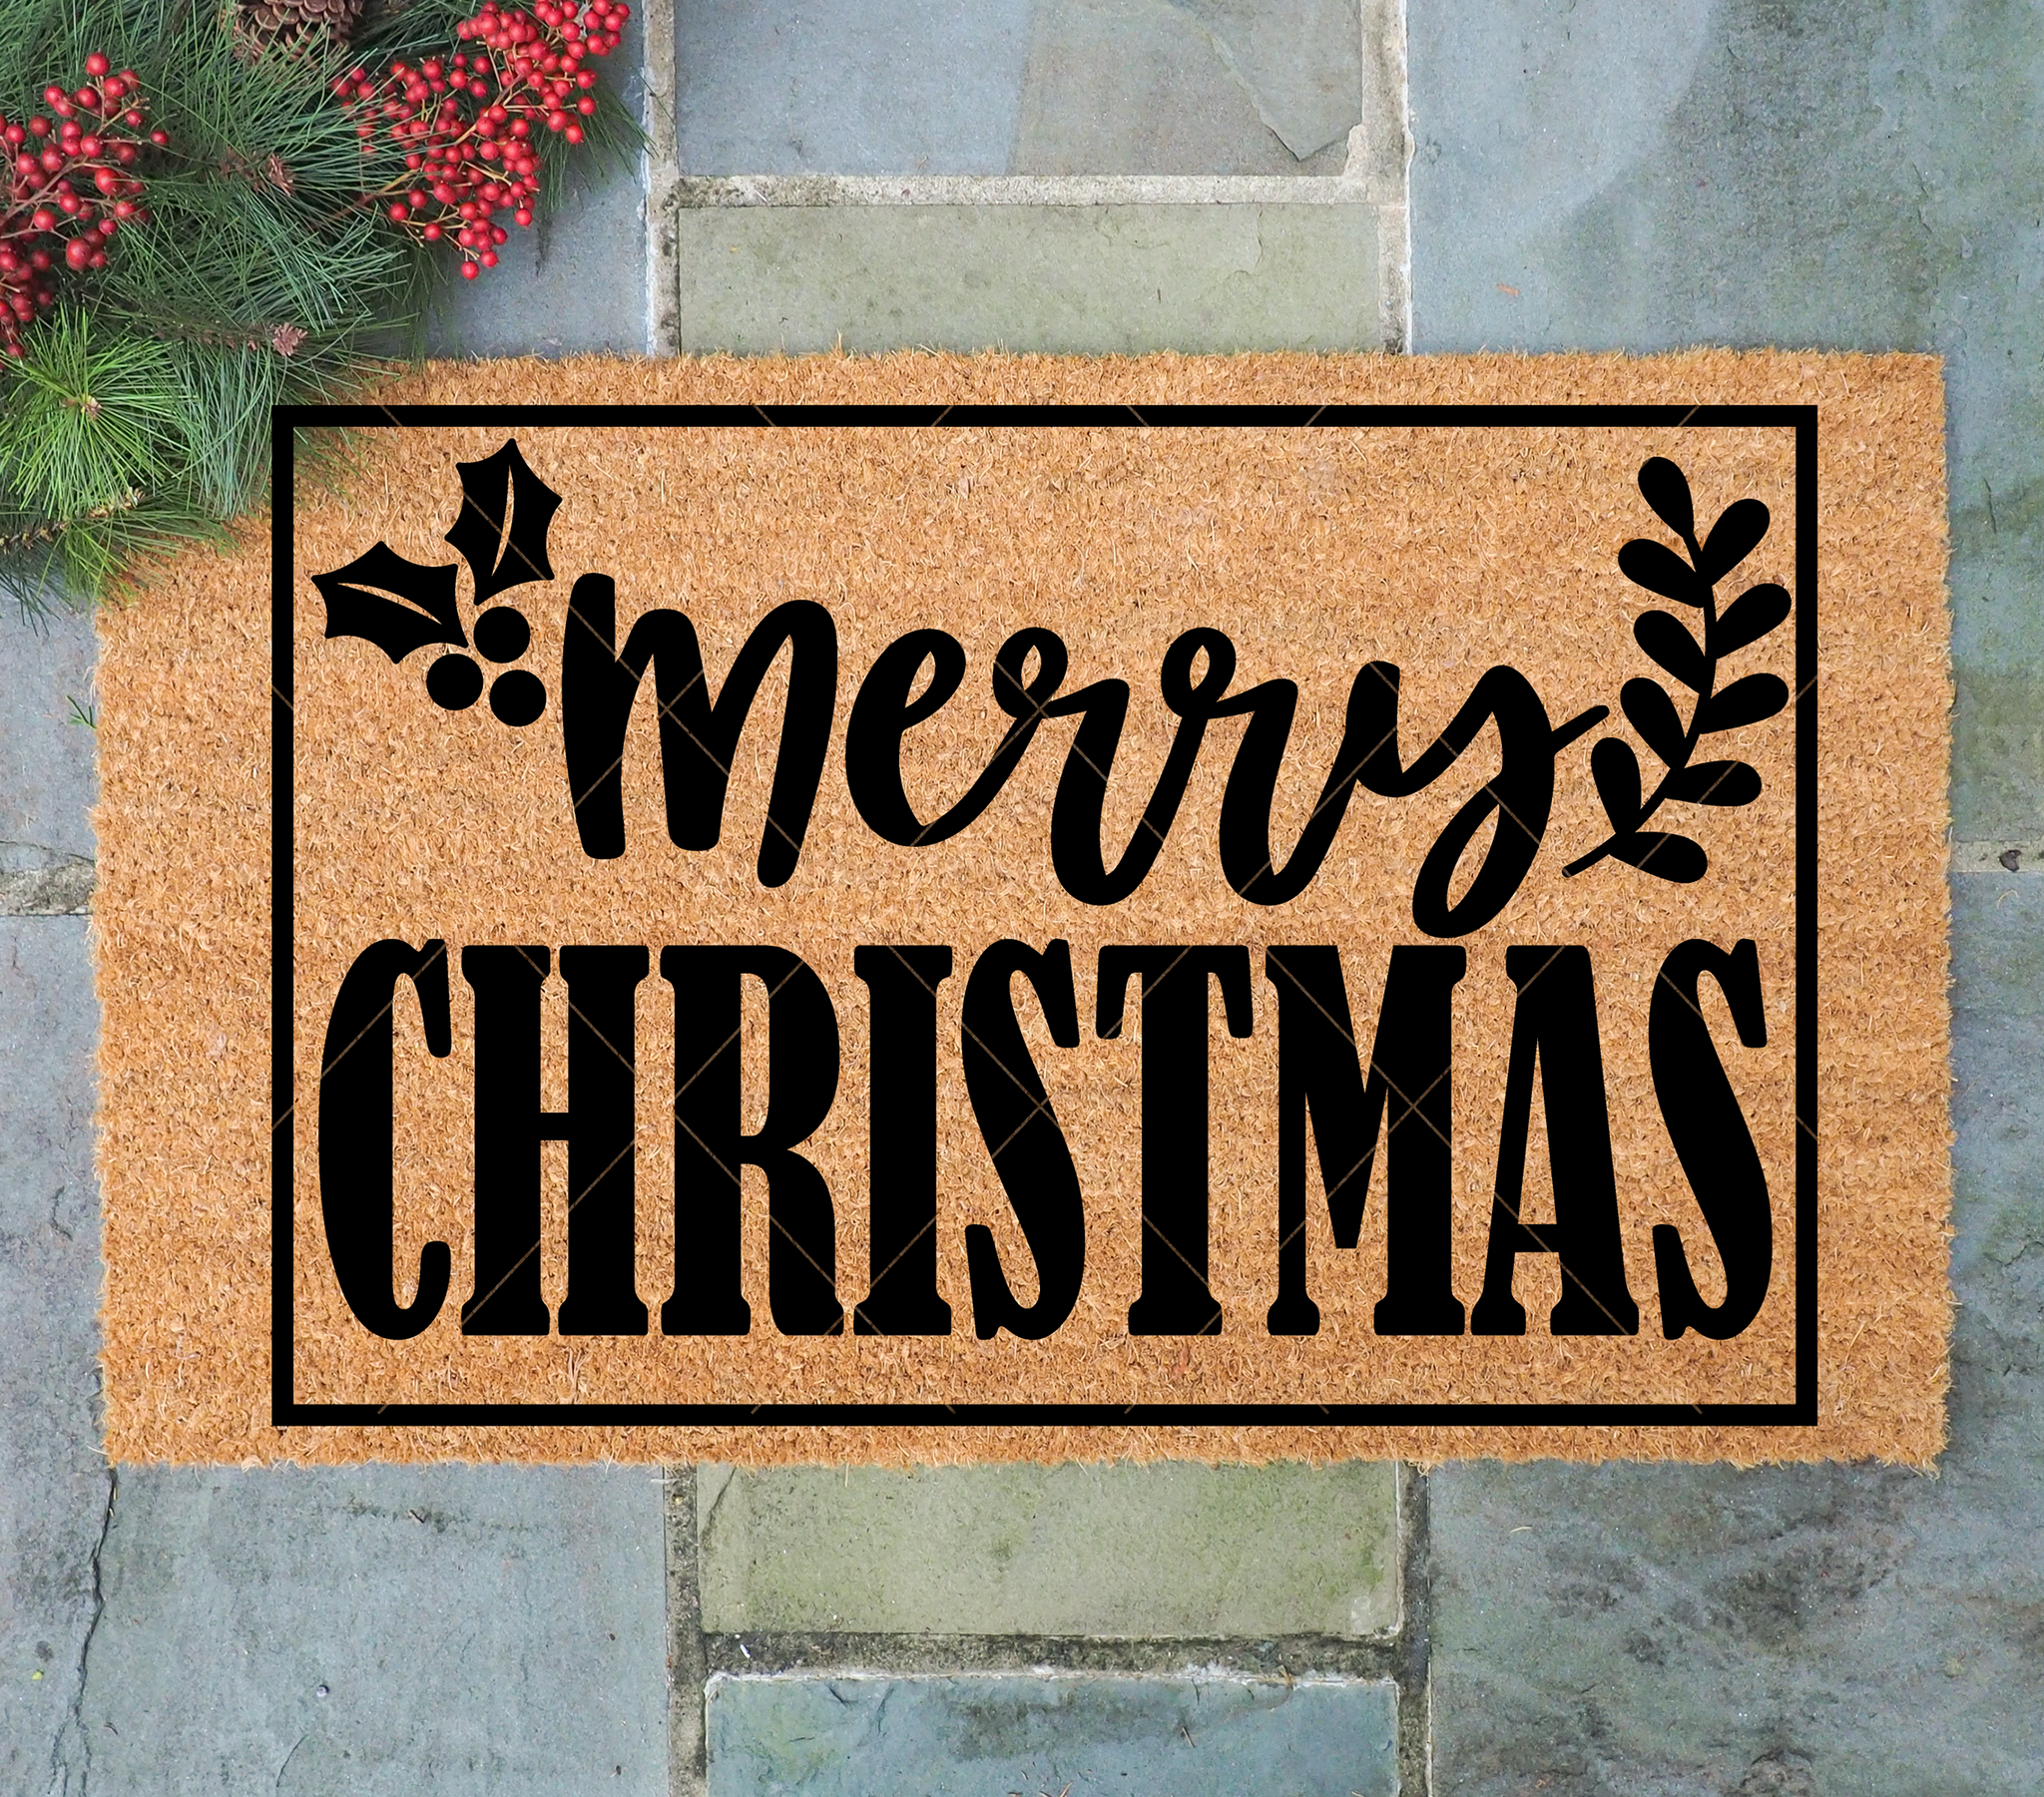 Christmas Door Mat SVG - Merry Christmas SVG for Cricut/Silhouette/Glowforge - Commercial Use SVG Files for Cricut & Silhouette